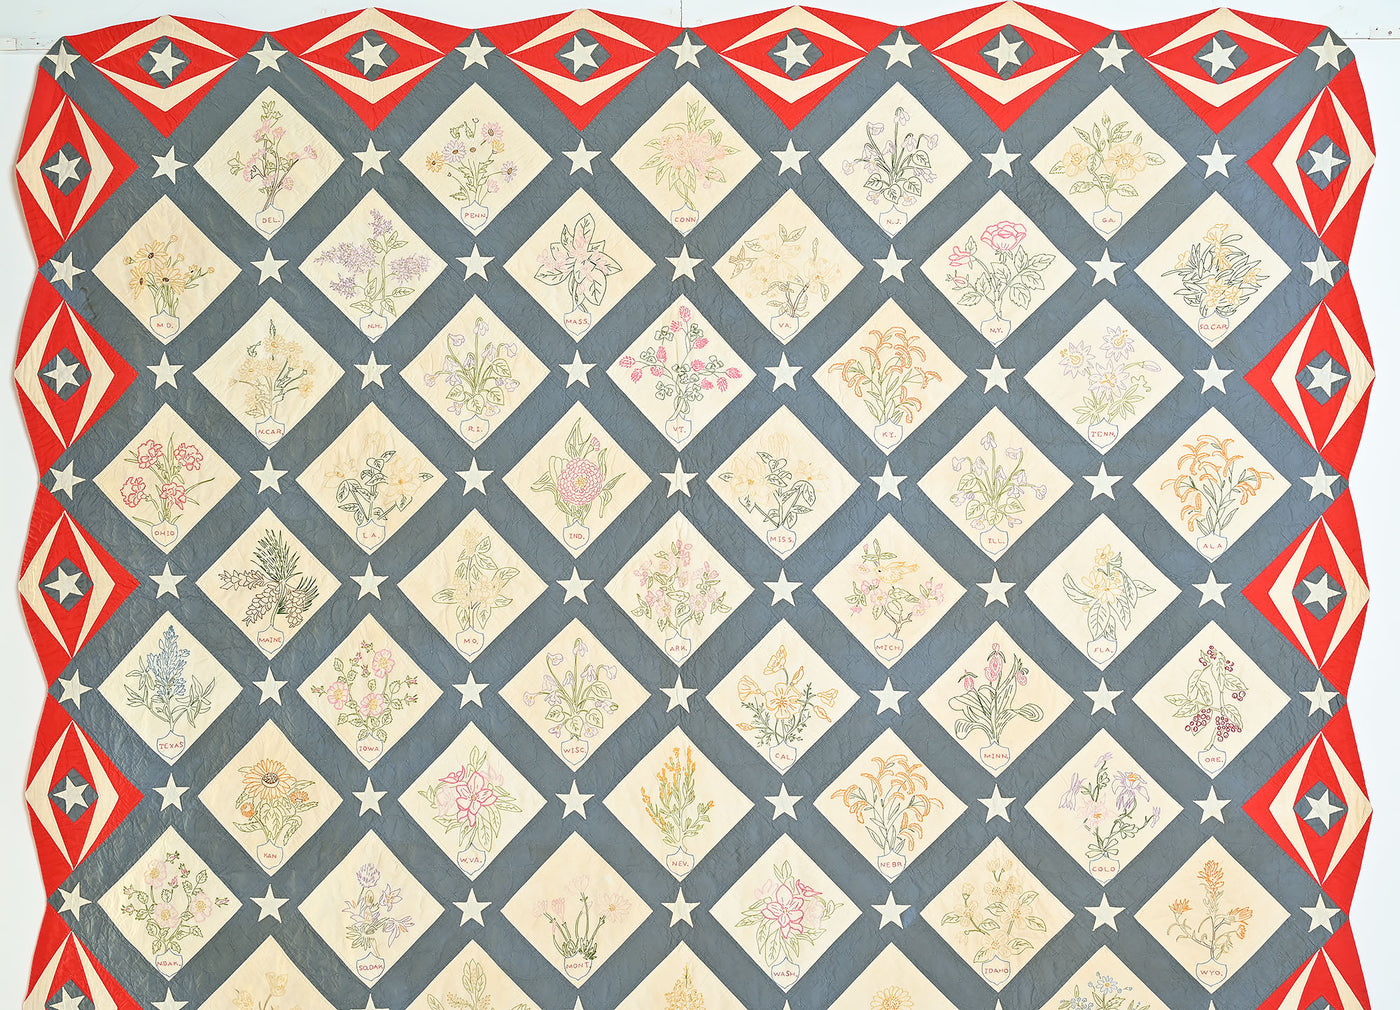 Criss cross quilted pattern with state flowers and stars.  